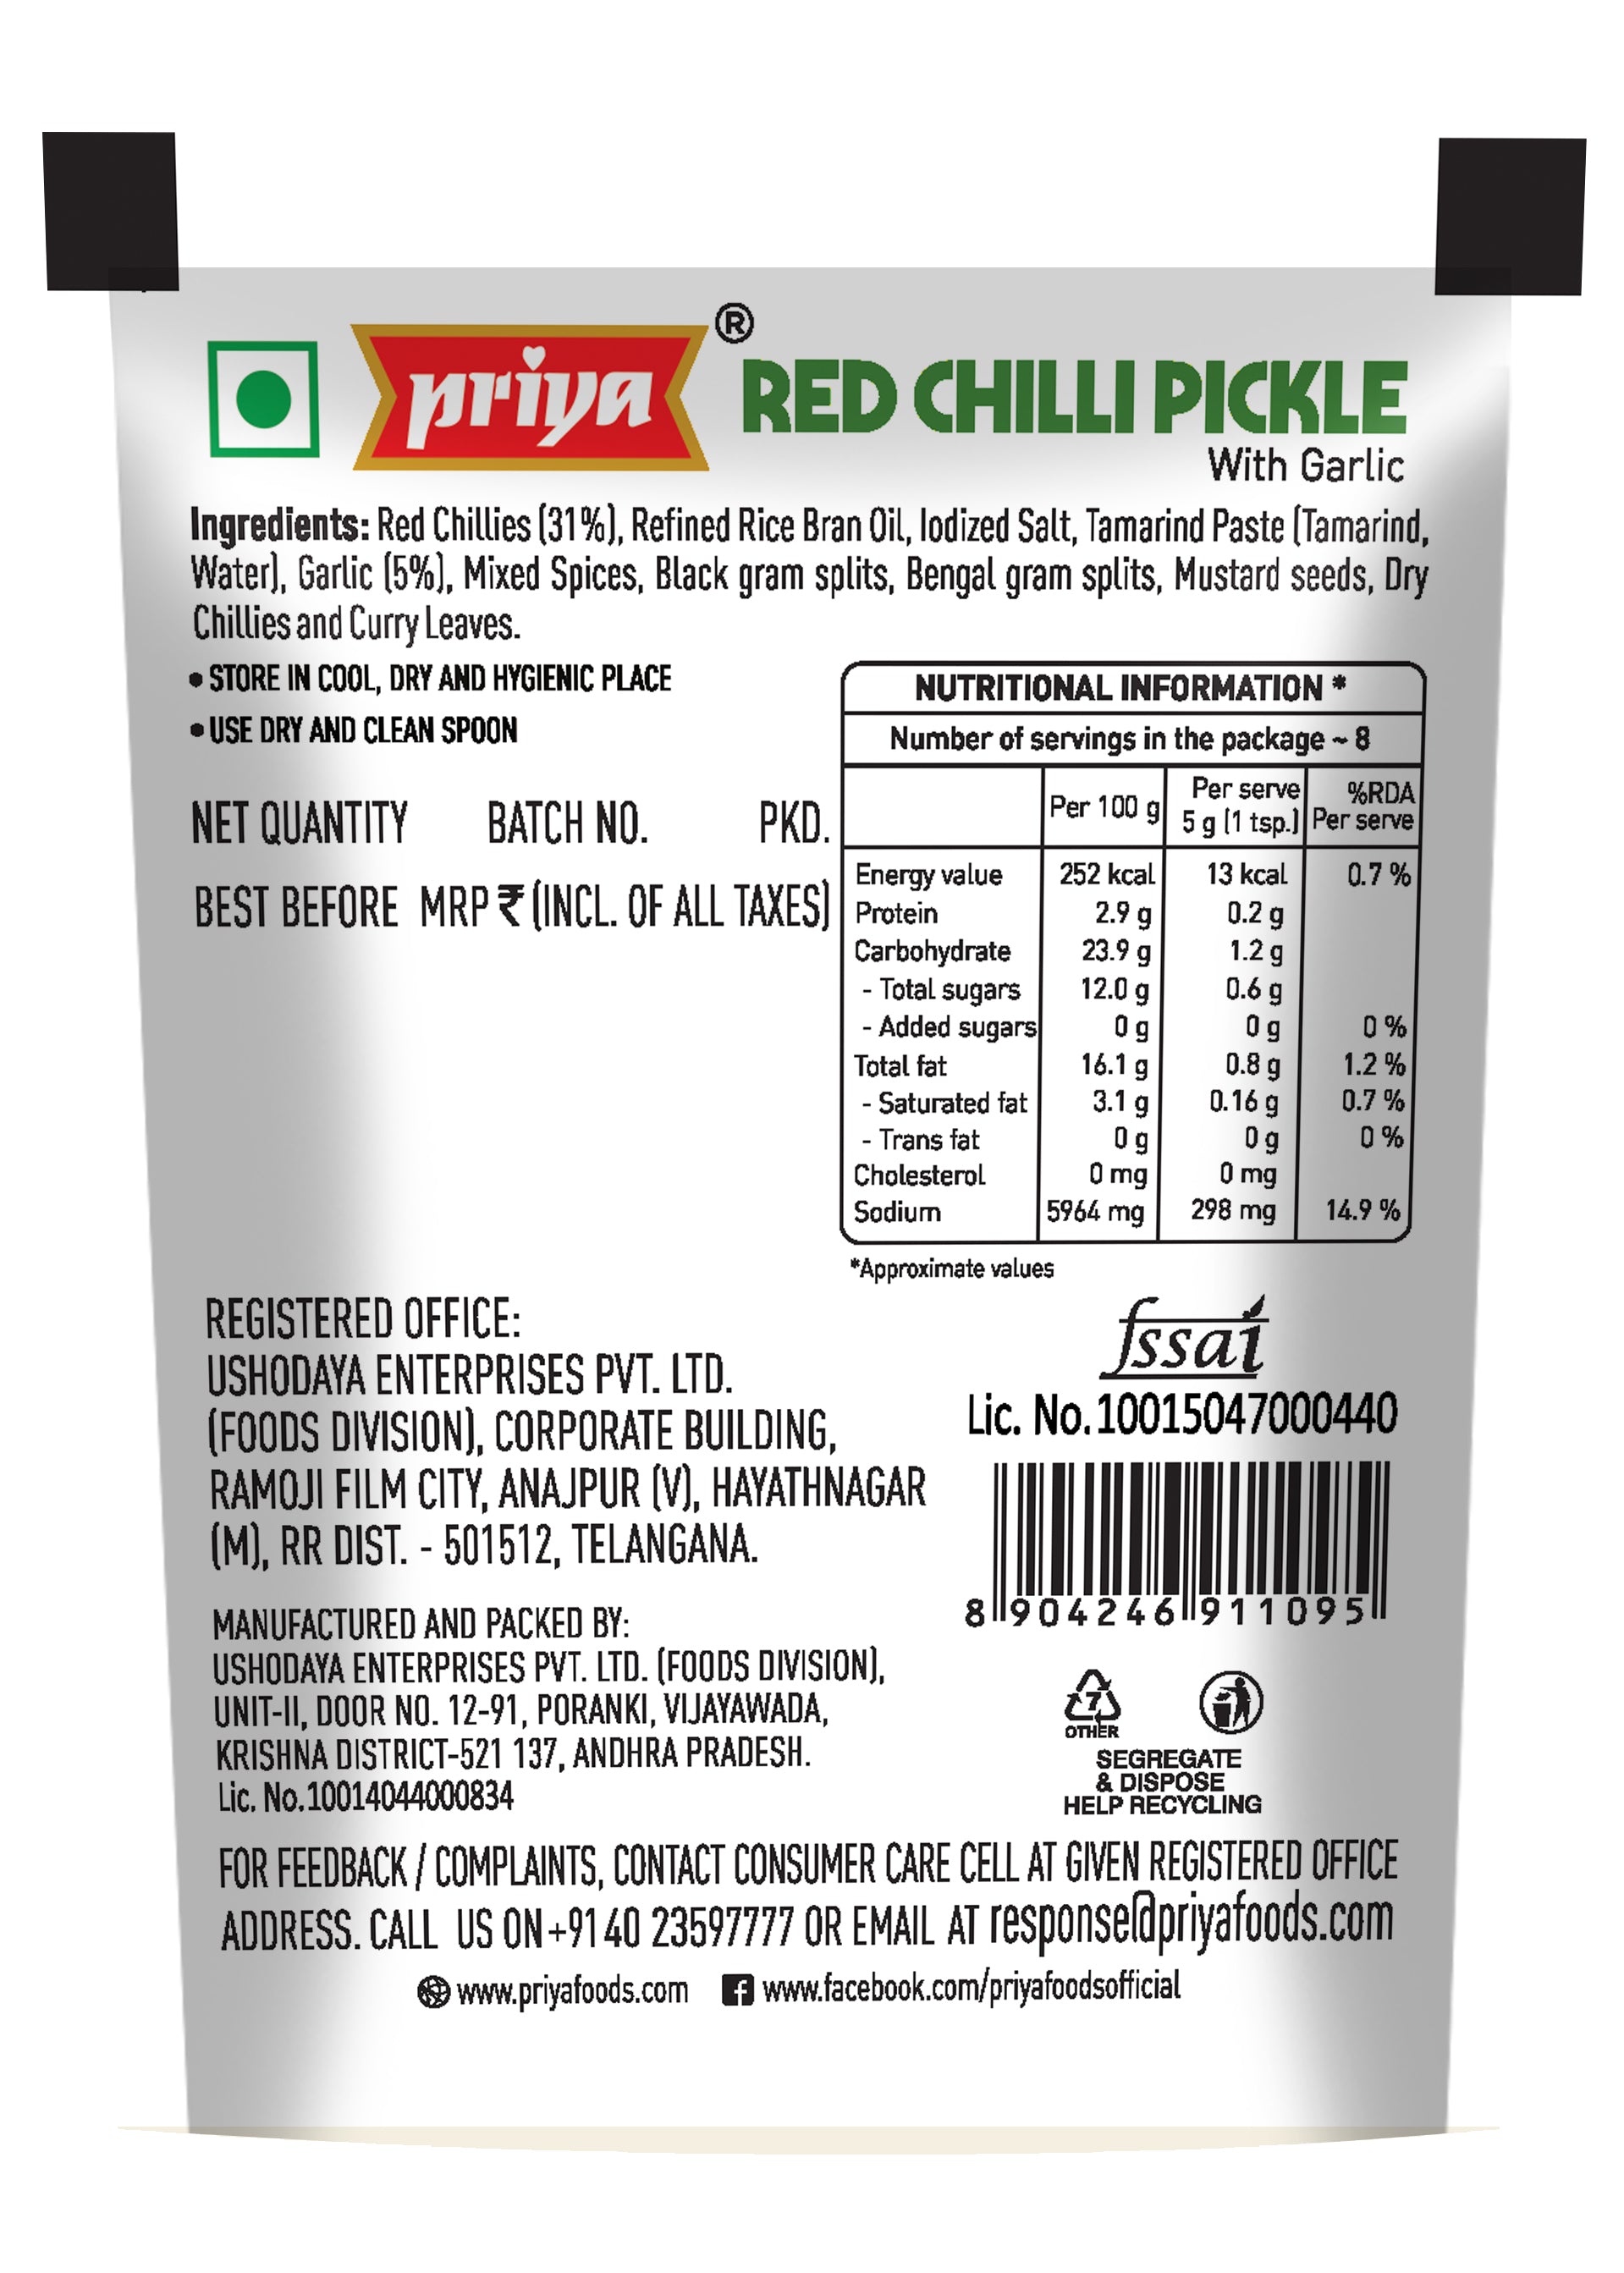 RED CHILLI PICKLE-35G SACHET(POUCH PACK OF 10)